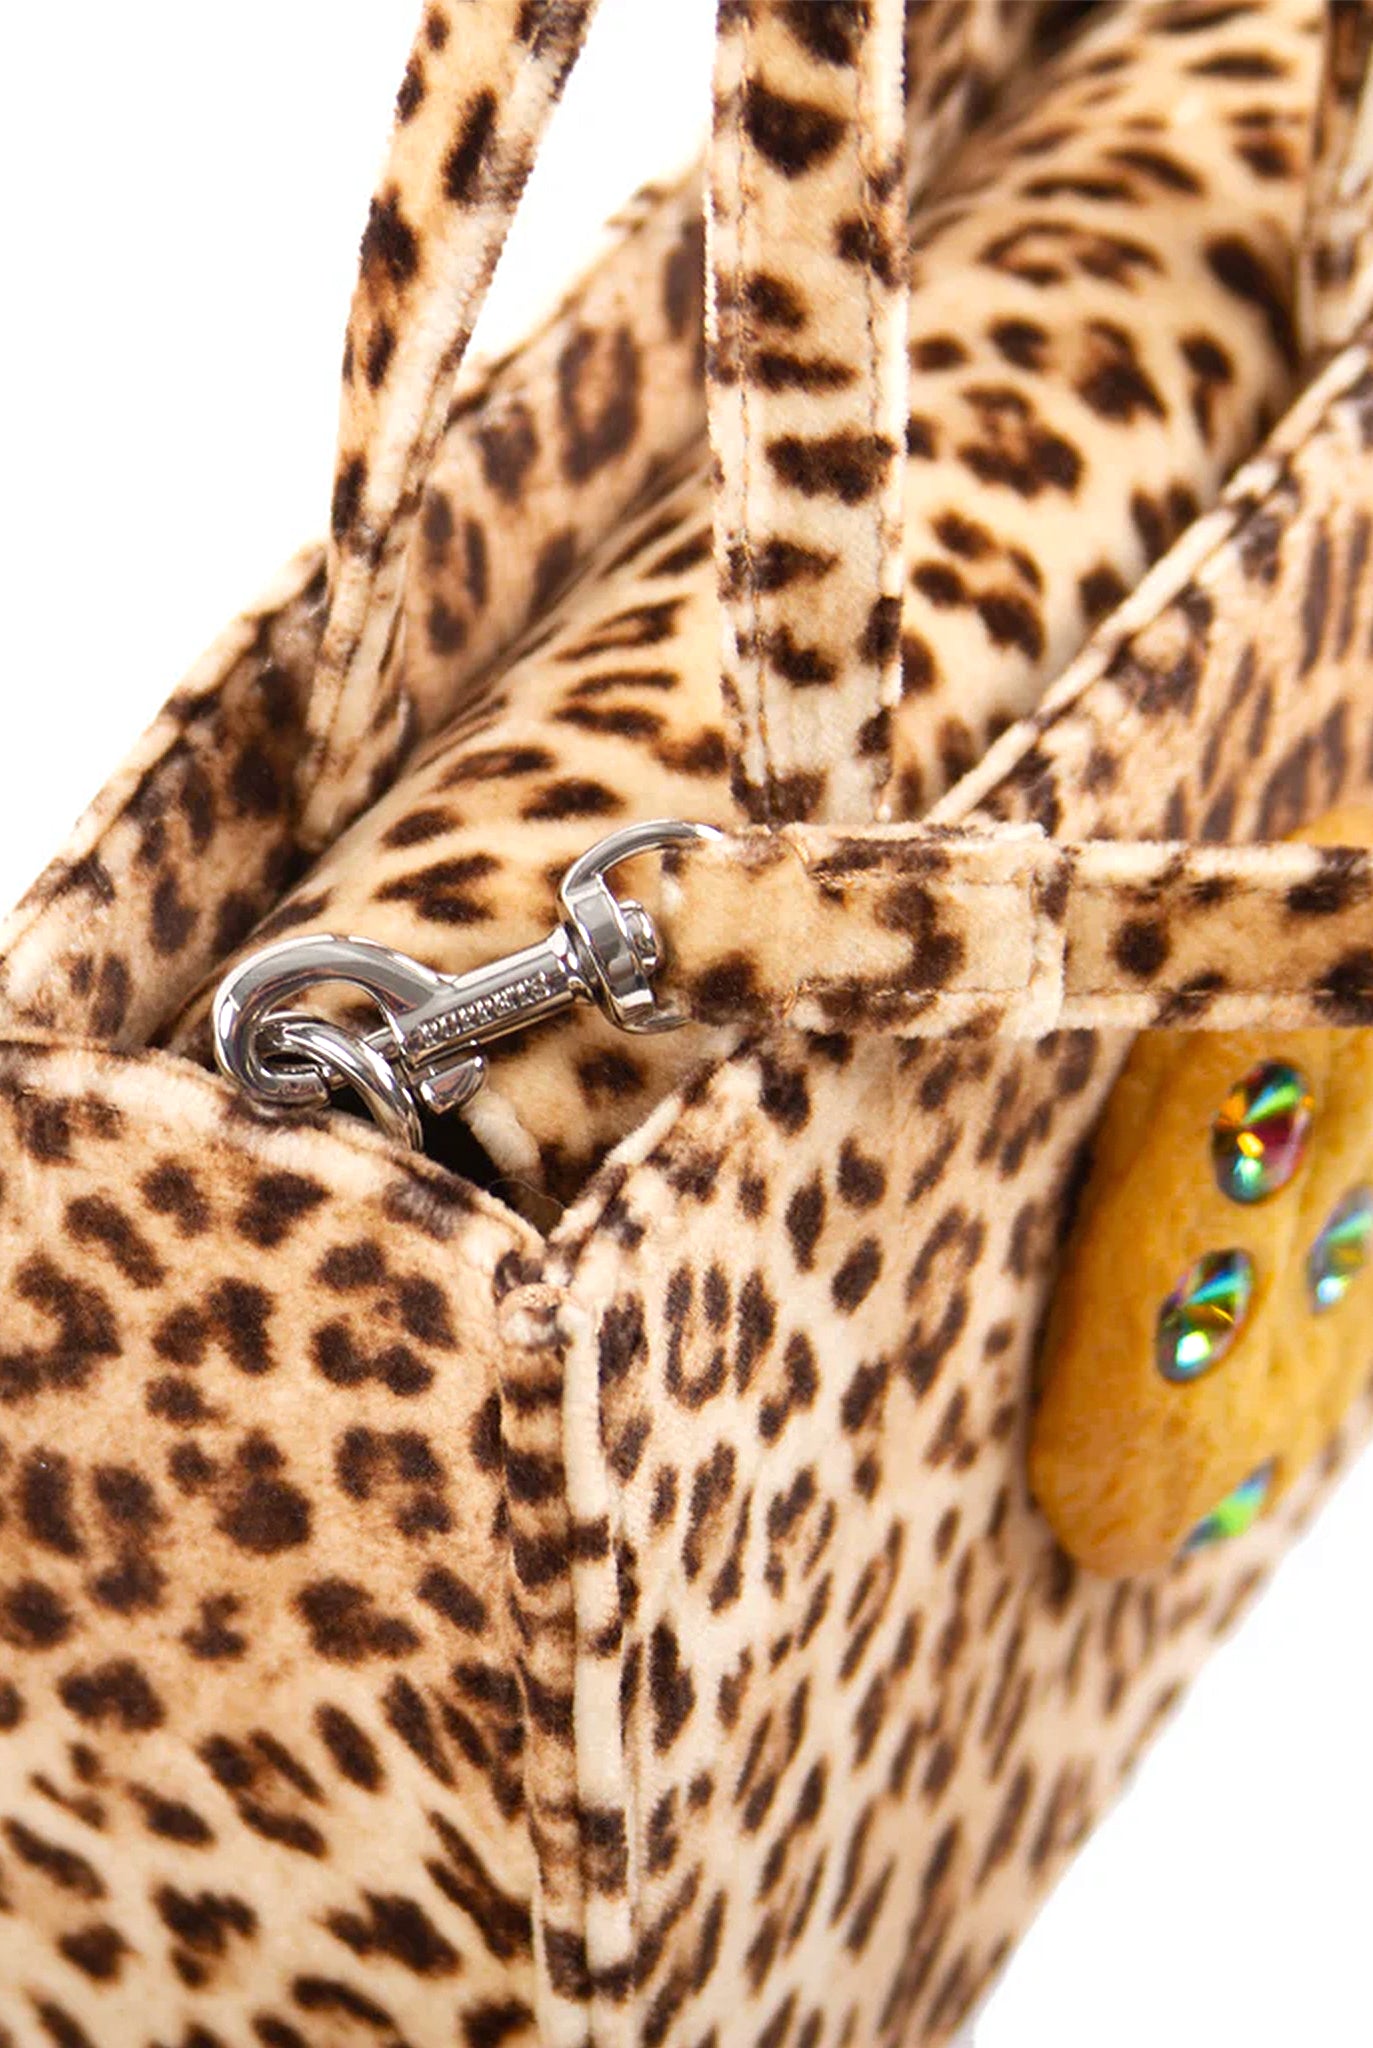 Puppets and Puppets Small Cookie Bag, Leopard Velvet